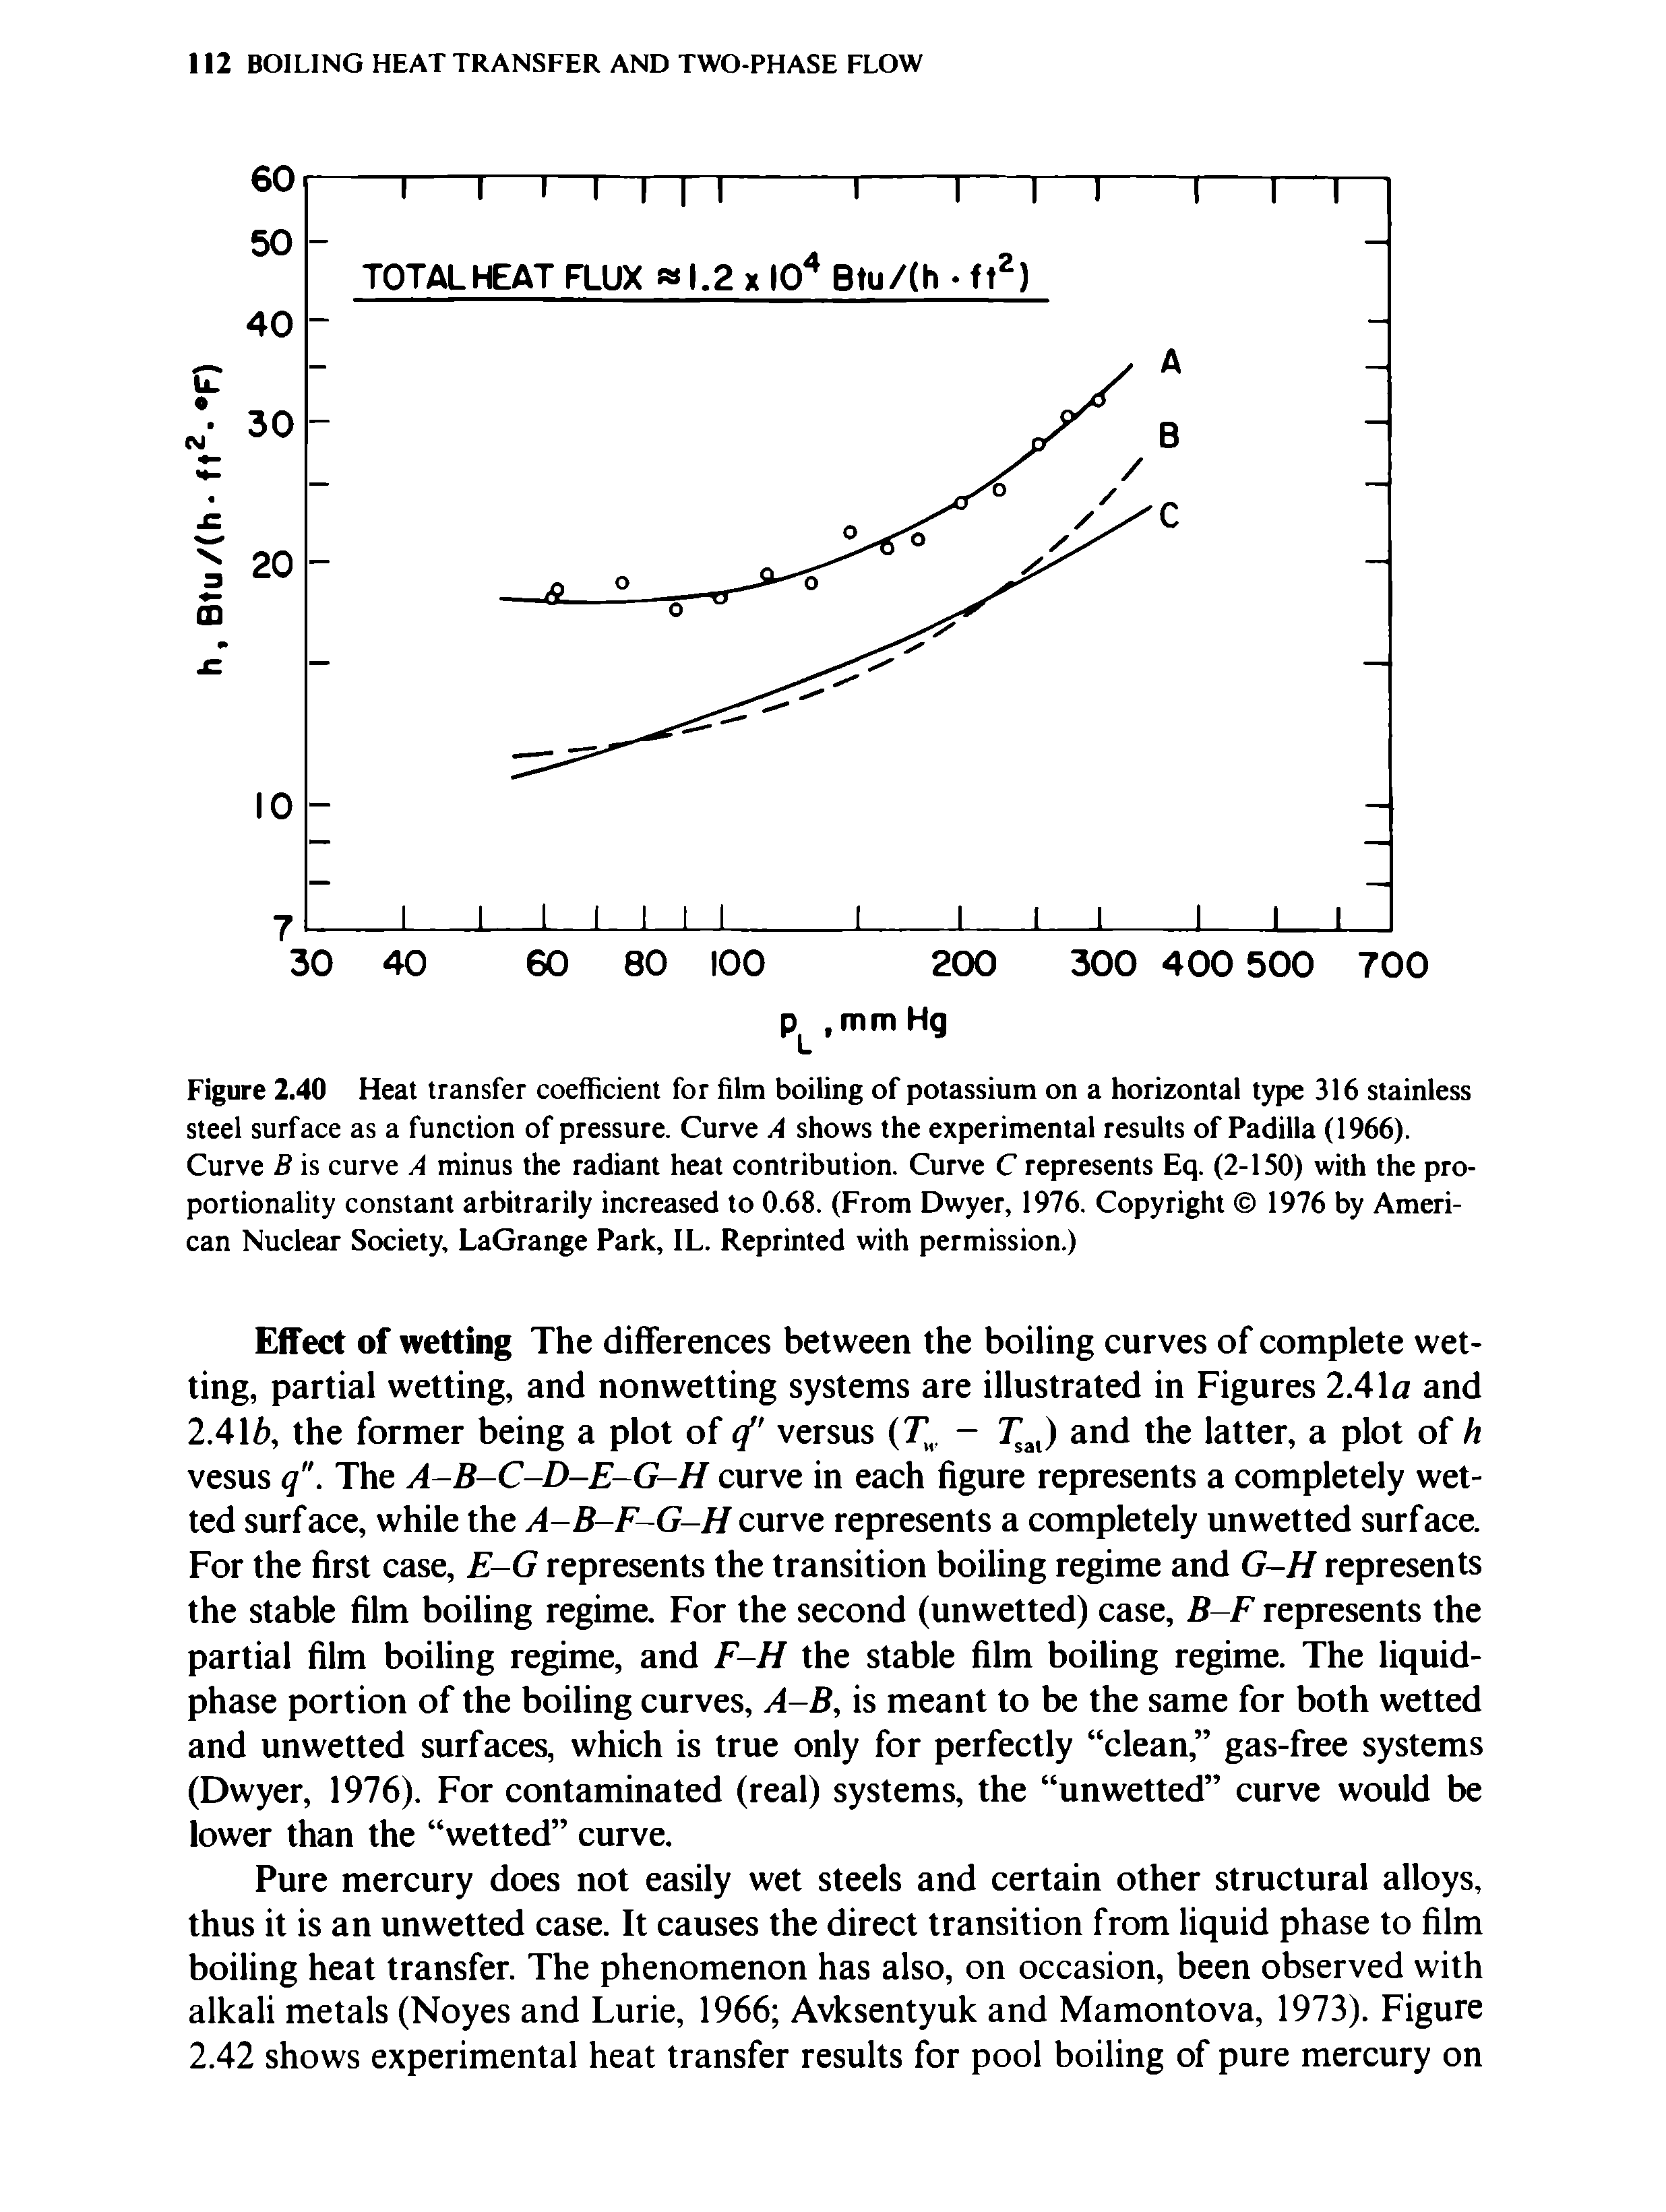 Figure 2.40 Heat transfer coefficient for film boiling of potassium on a horizontal type 316 stainless steel surface as a function of pressure. Curve A shows the experimental results of Padilla (1966). Curve B is curve A minus the radiant heat contribution. Curve C represents Eq. (2-150) with the proportionality constant arbitrarily increased to 0.68. (From Dwyer, 1976. Copyright 1976 by American Nuclear Society, LaGrange Park, IL. Reprinted with permission.)...